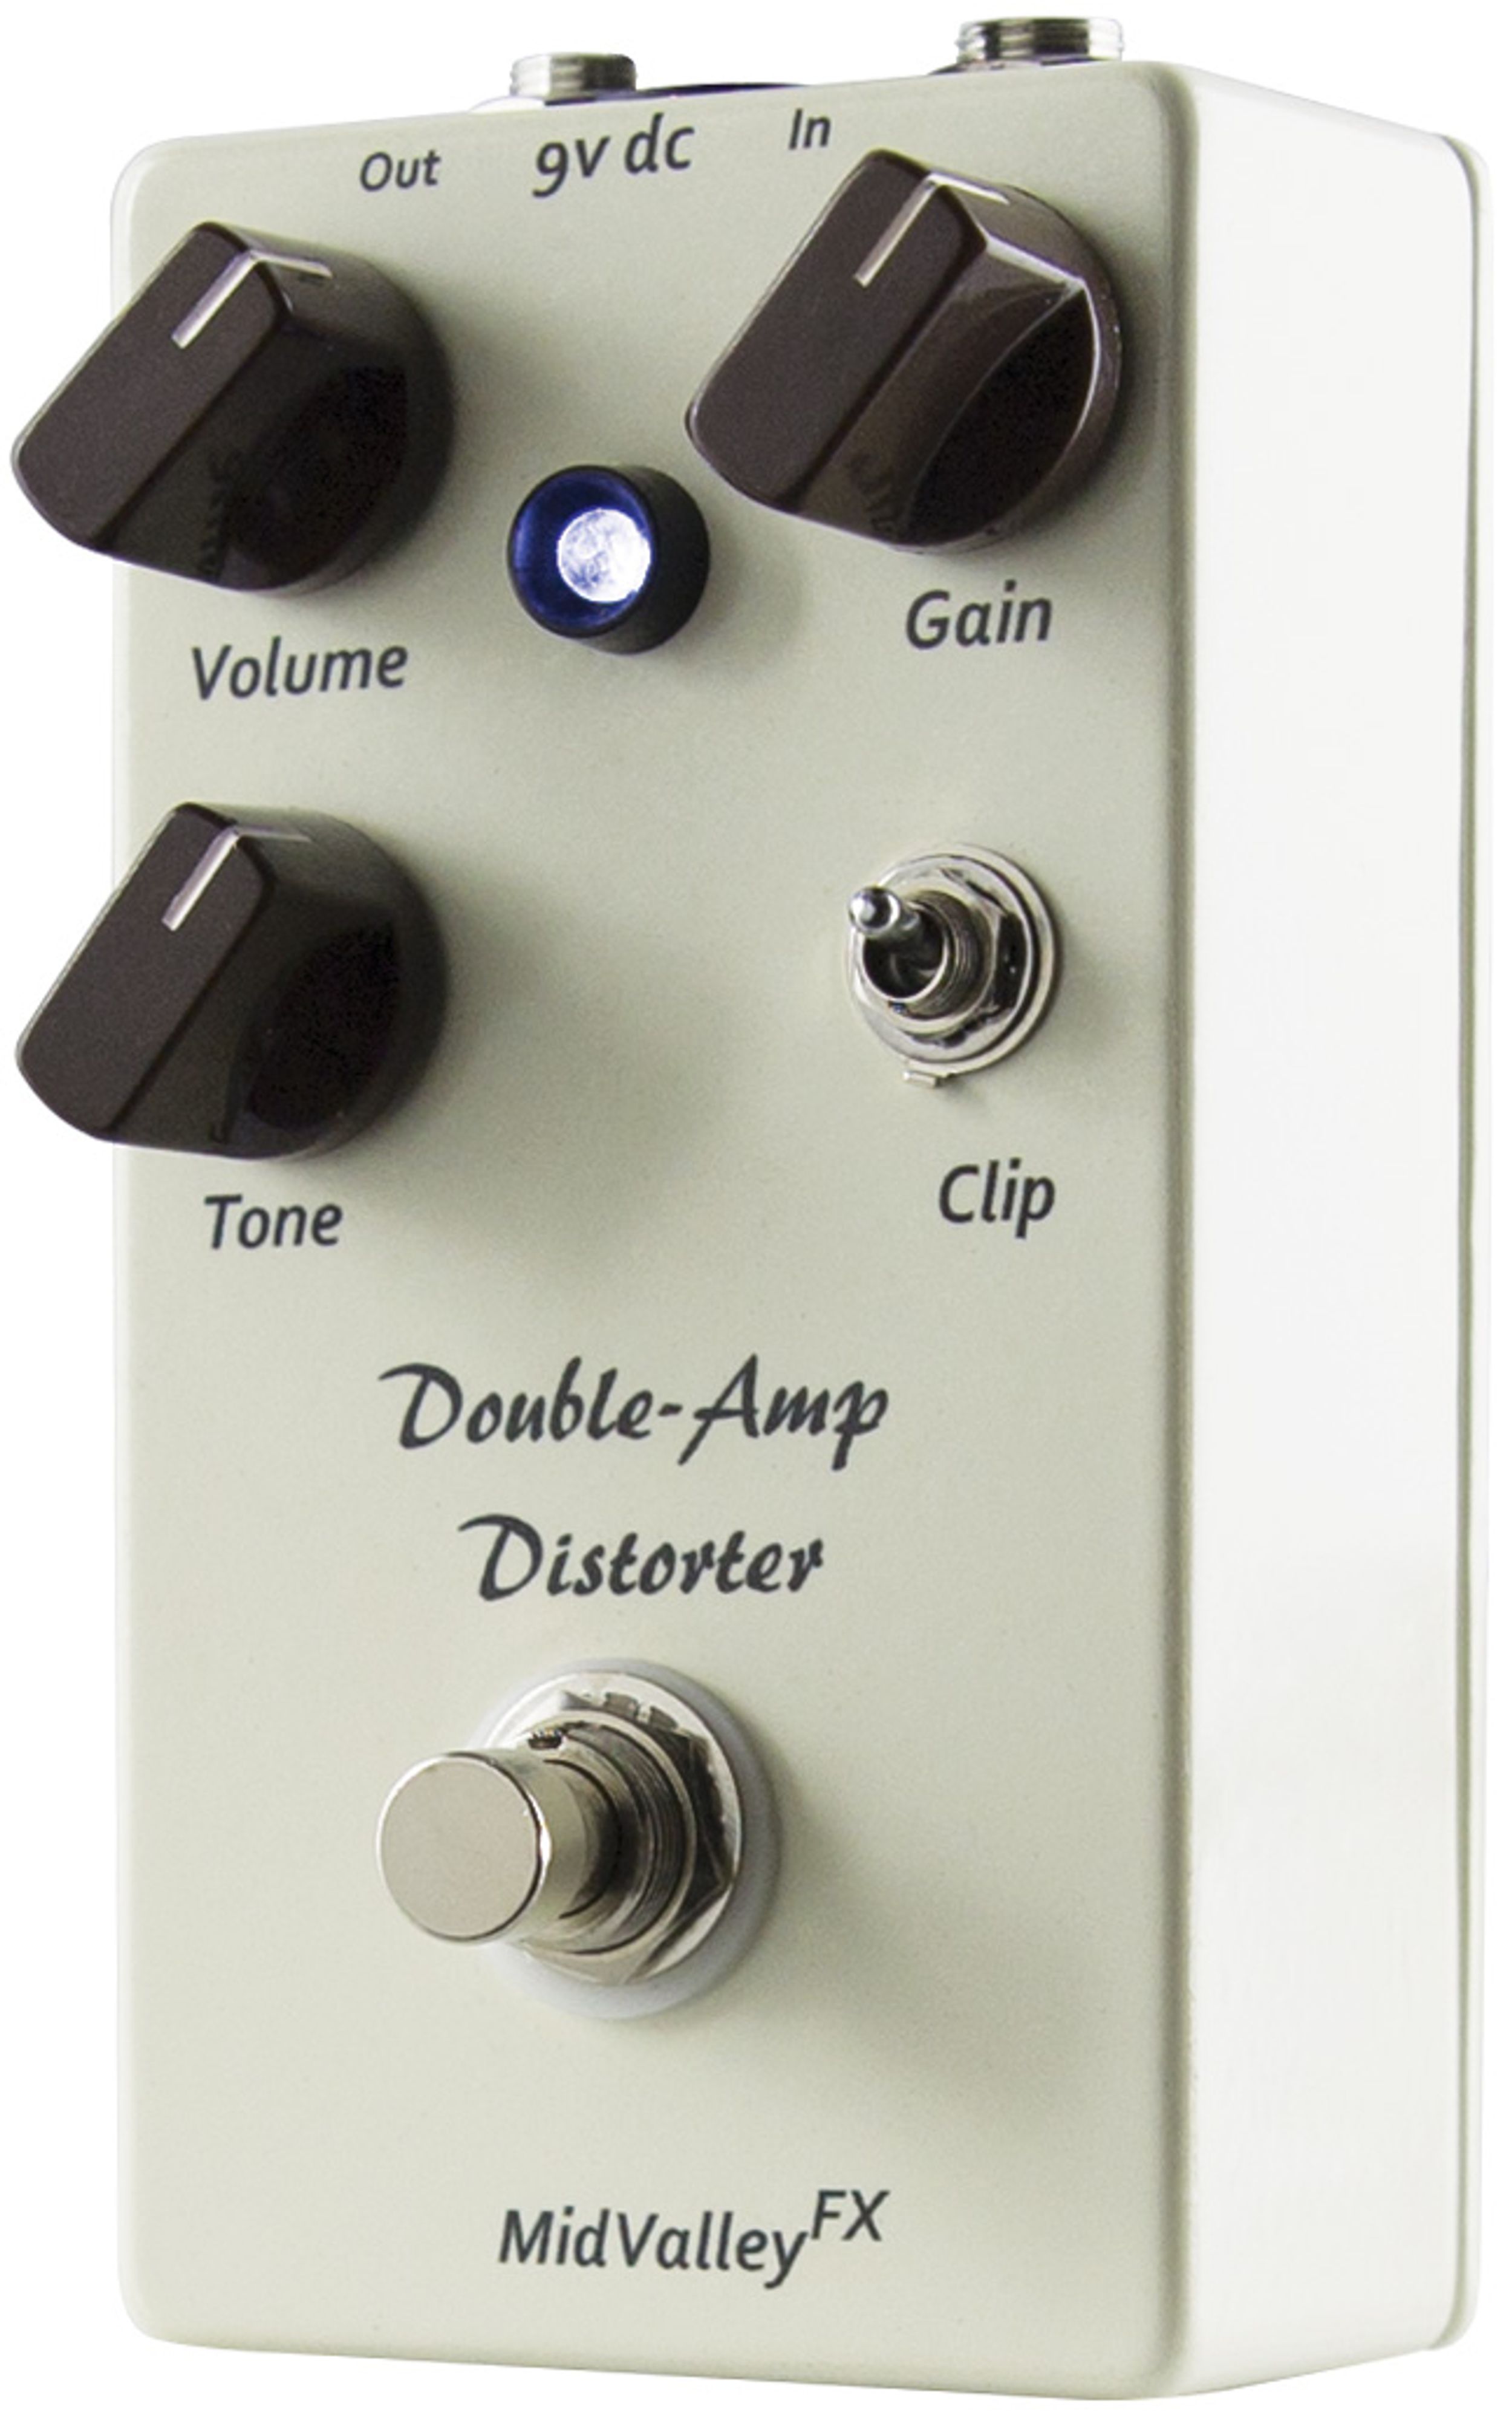 MidValleyFx Double-Amp Distorter Review